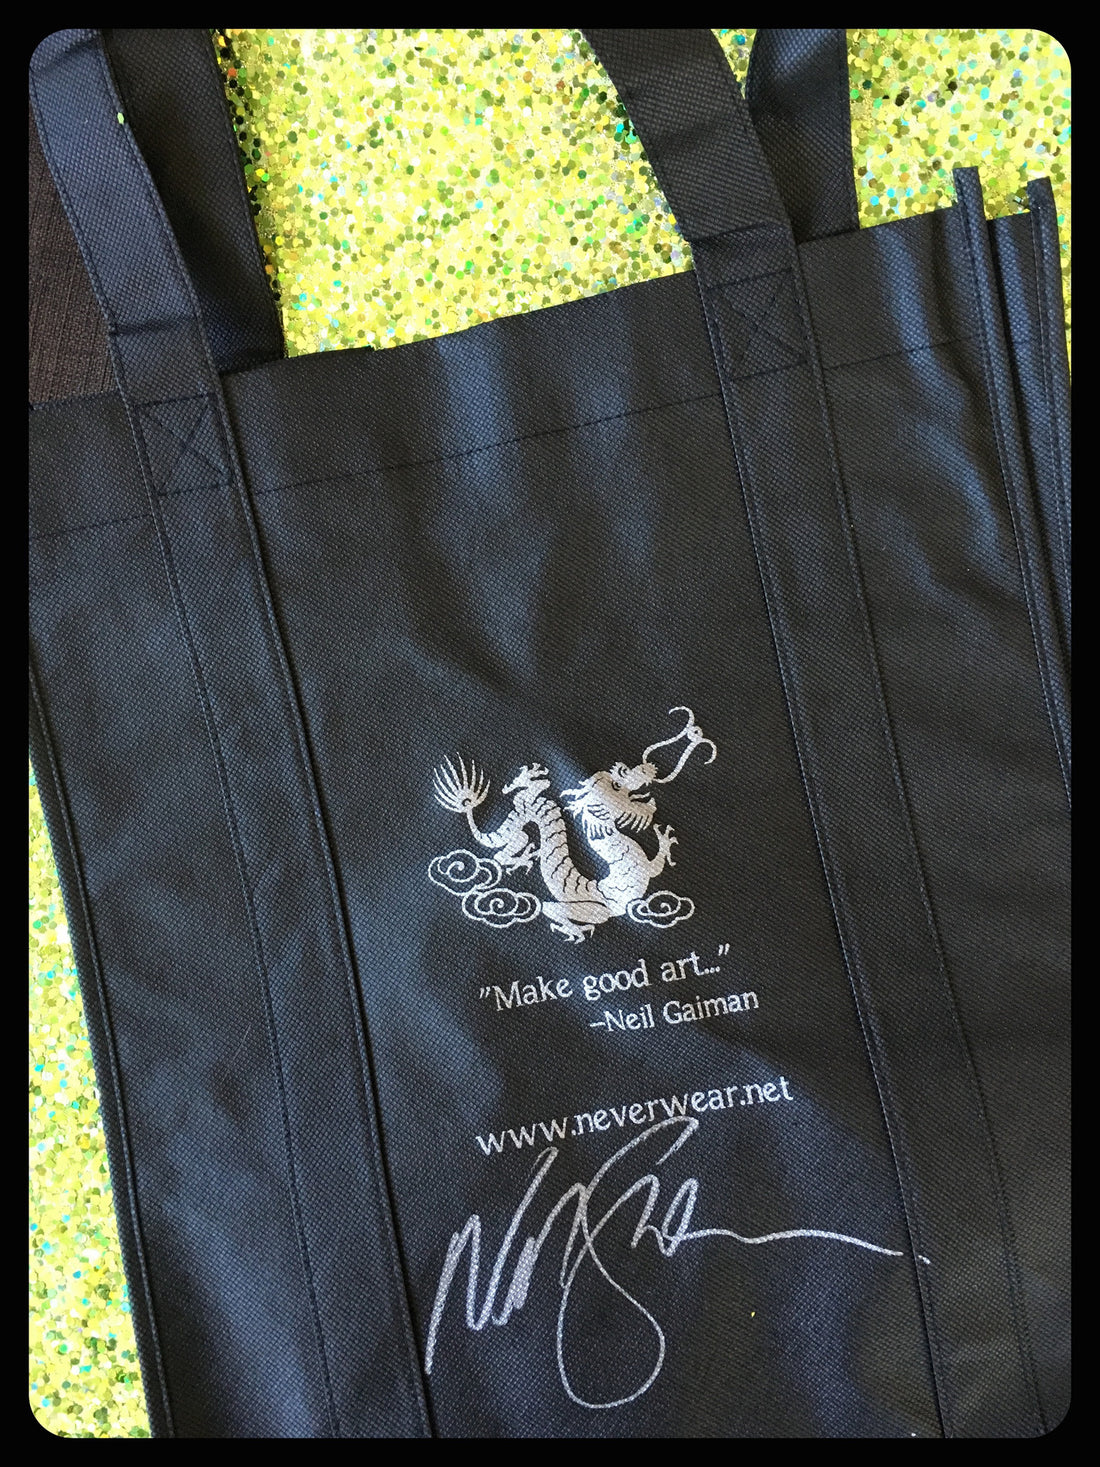 In which we offer a Writer Kit #3! Signed totes available as well